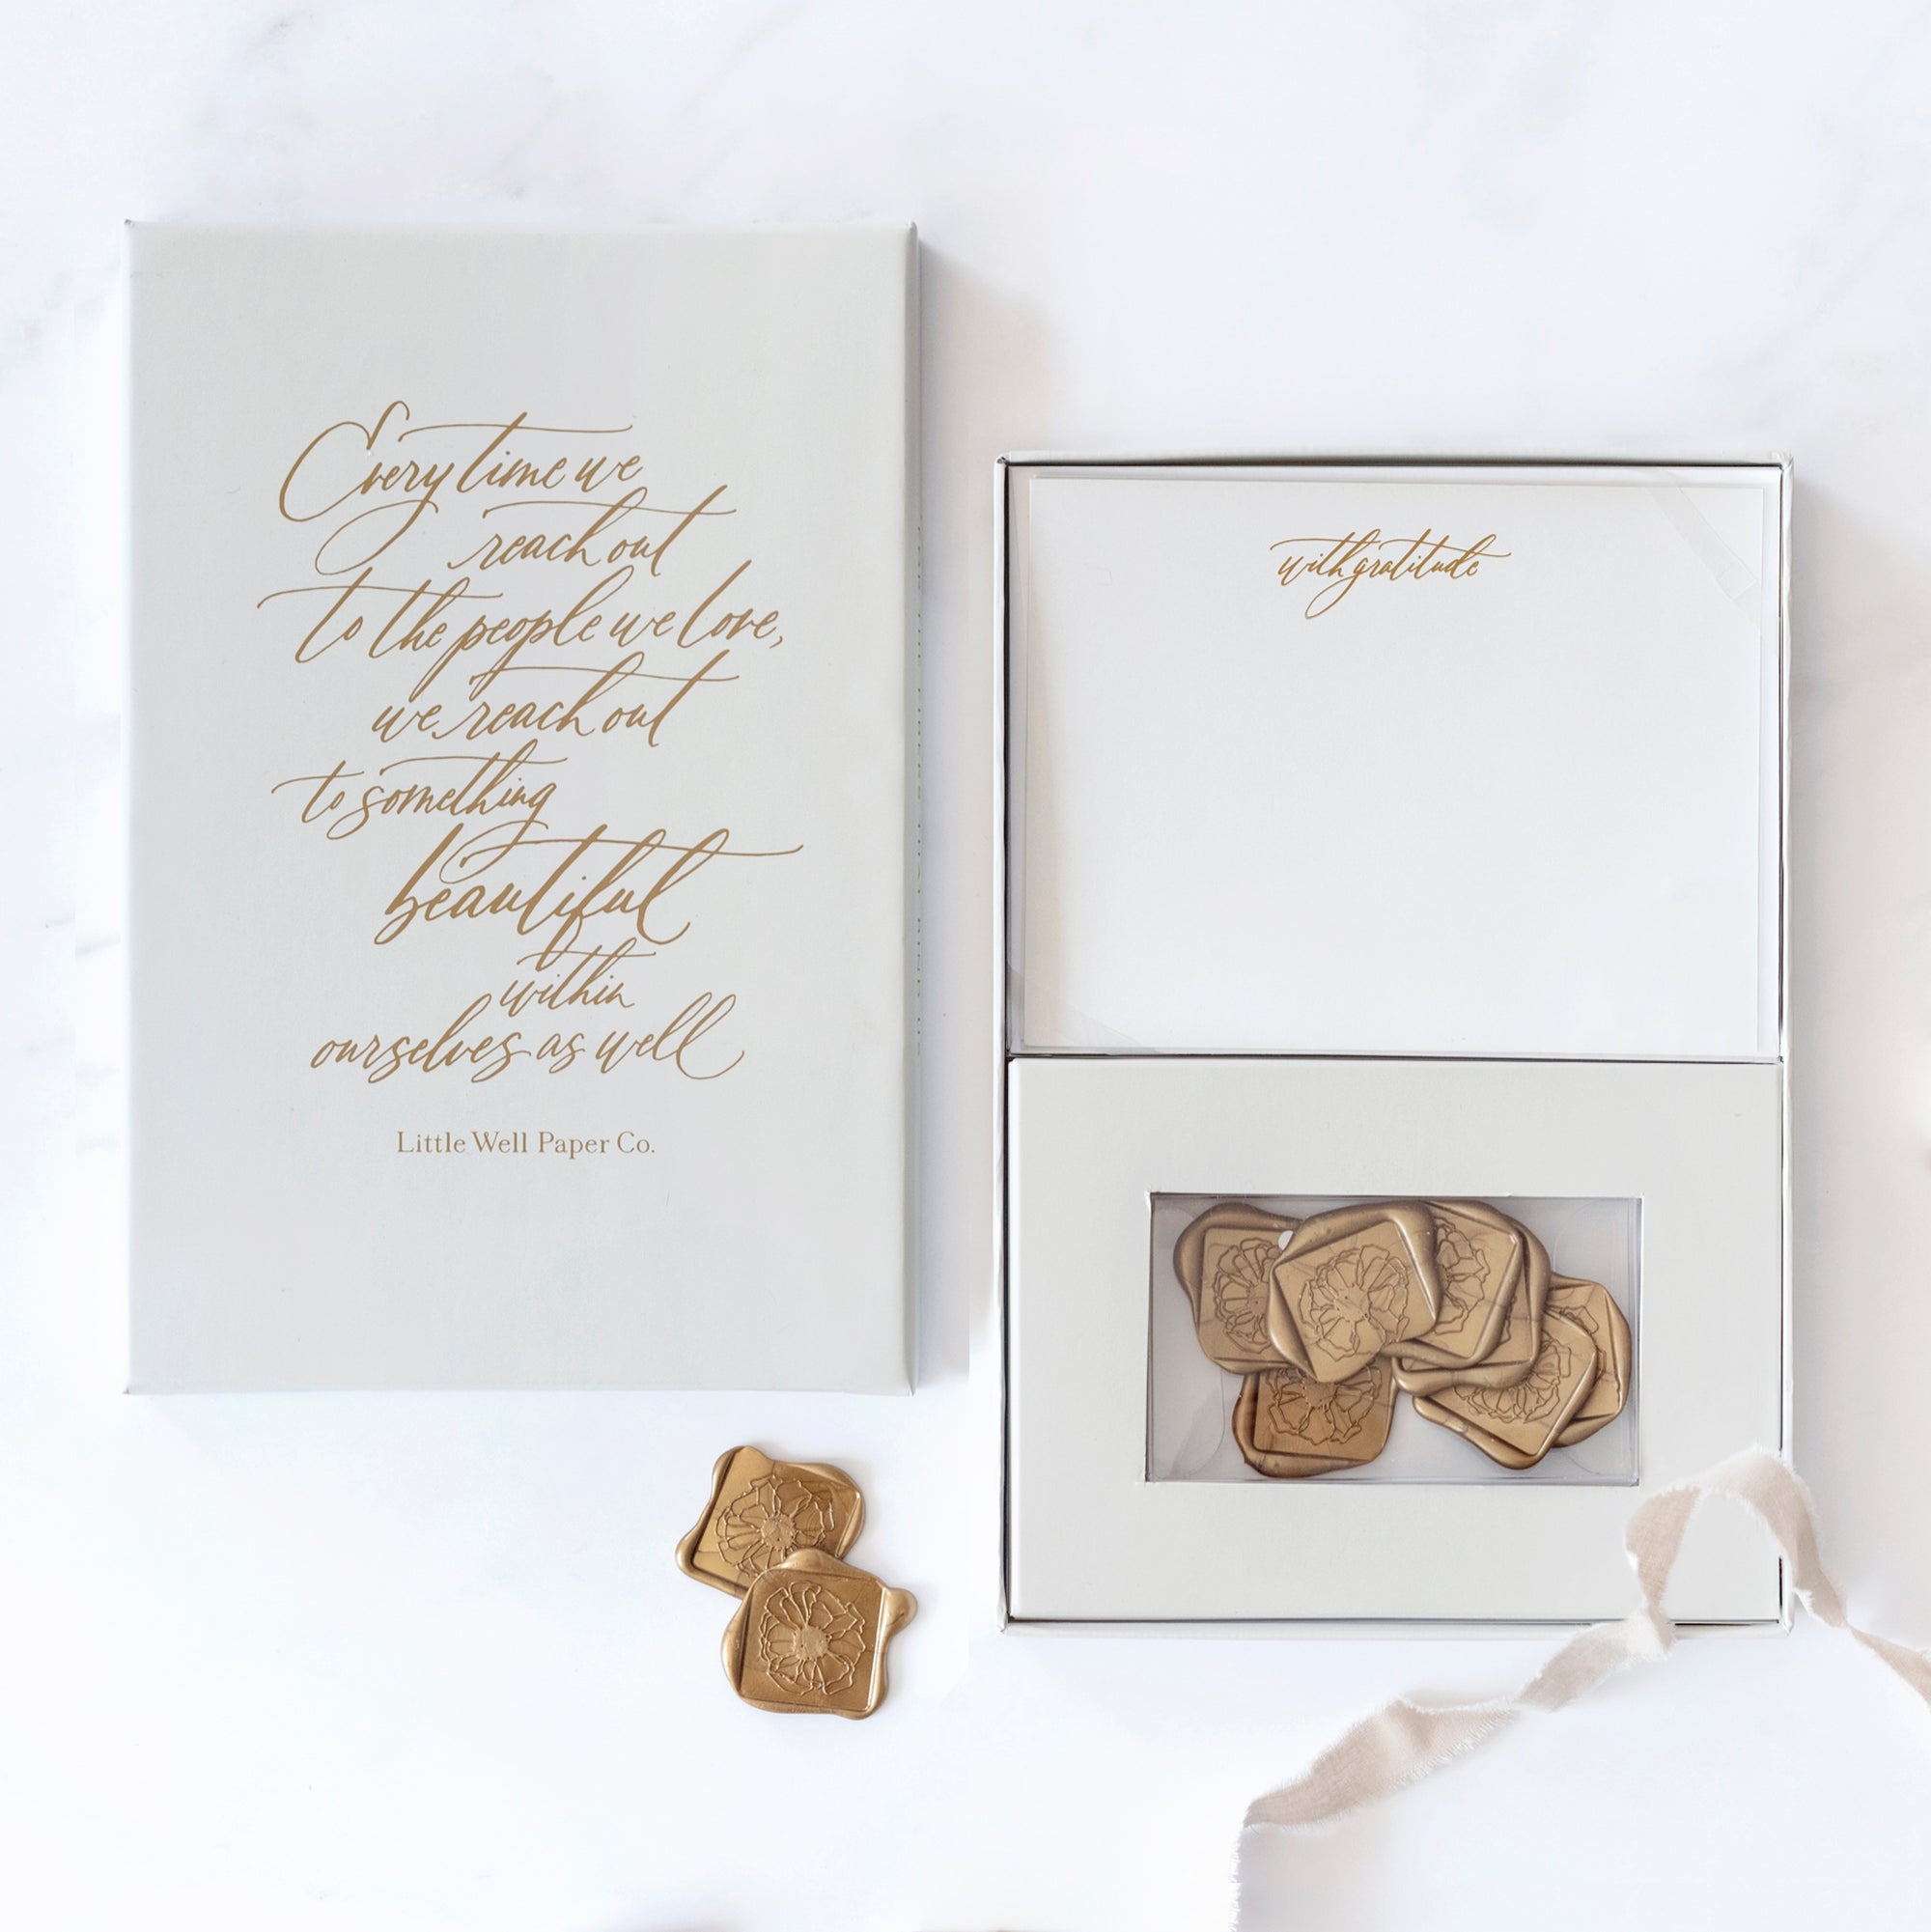 Our "Gratitude" flat note stationery set includes a set of 6 foil printed cards and envelopes with 6 professional grade, self adhesive wax seals.